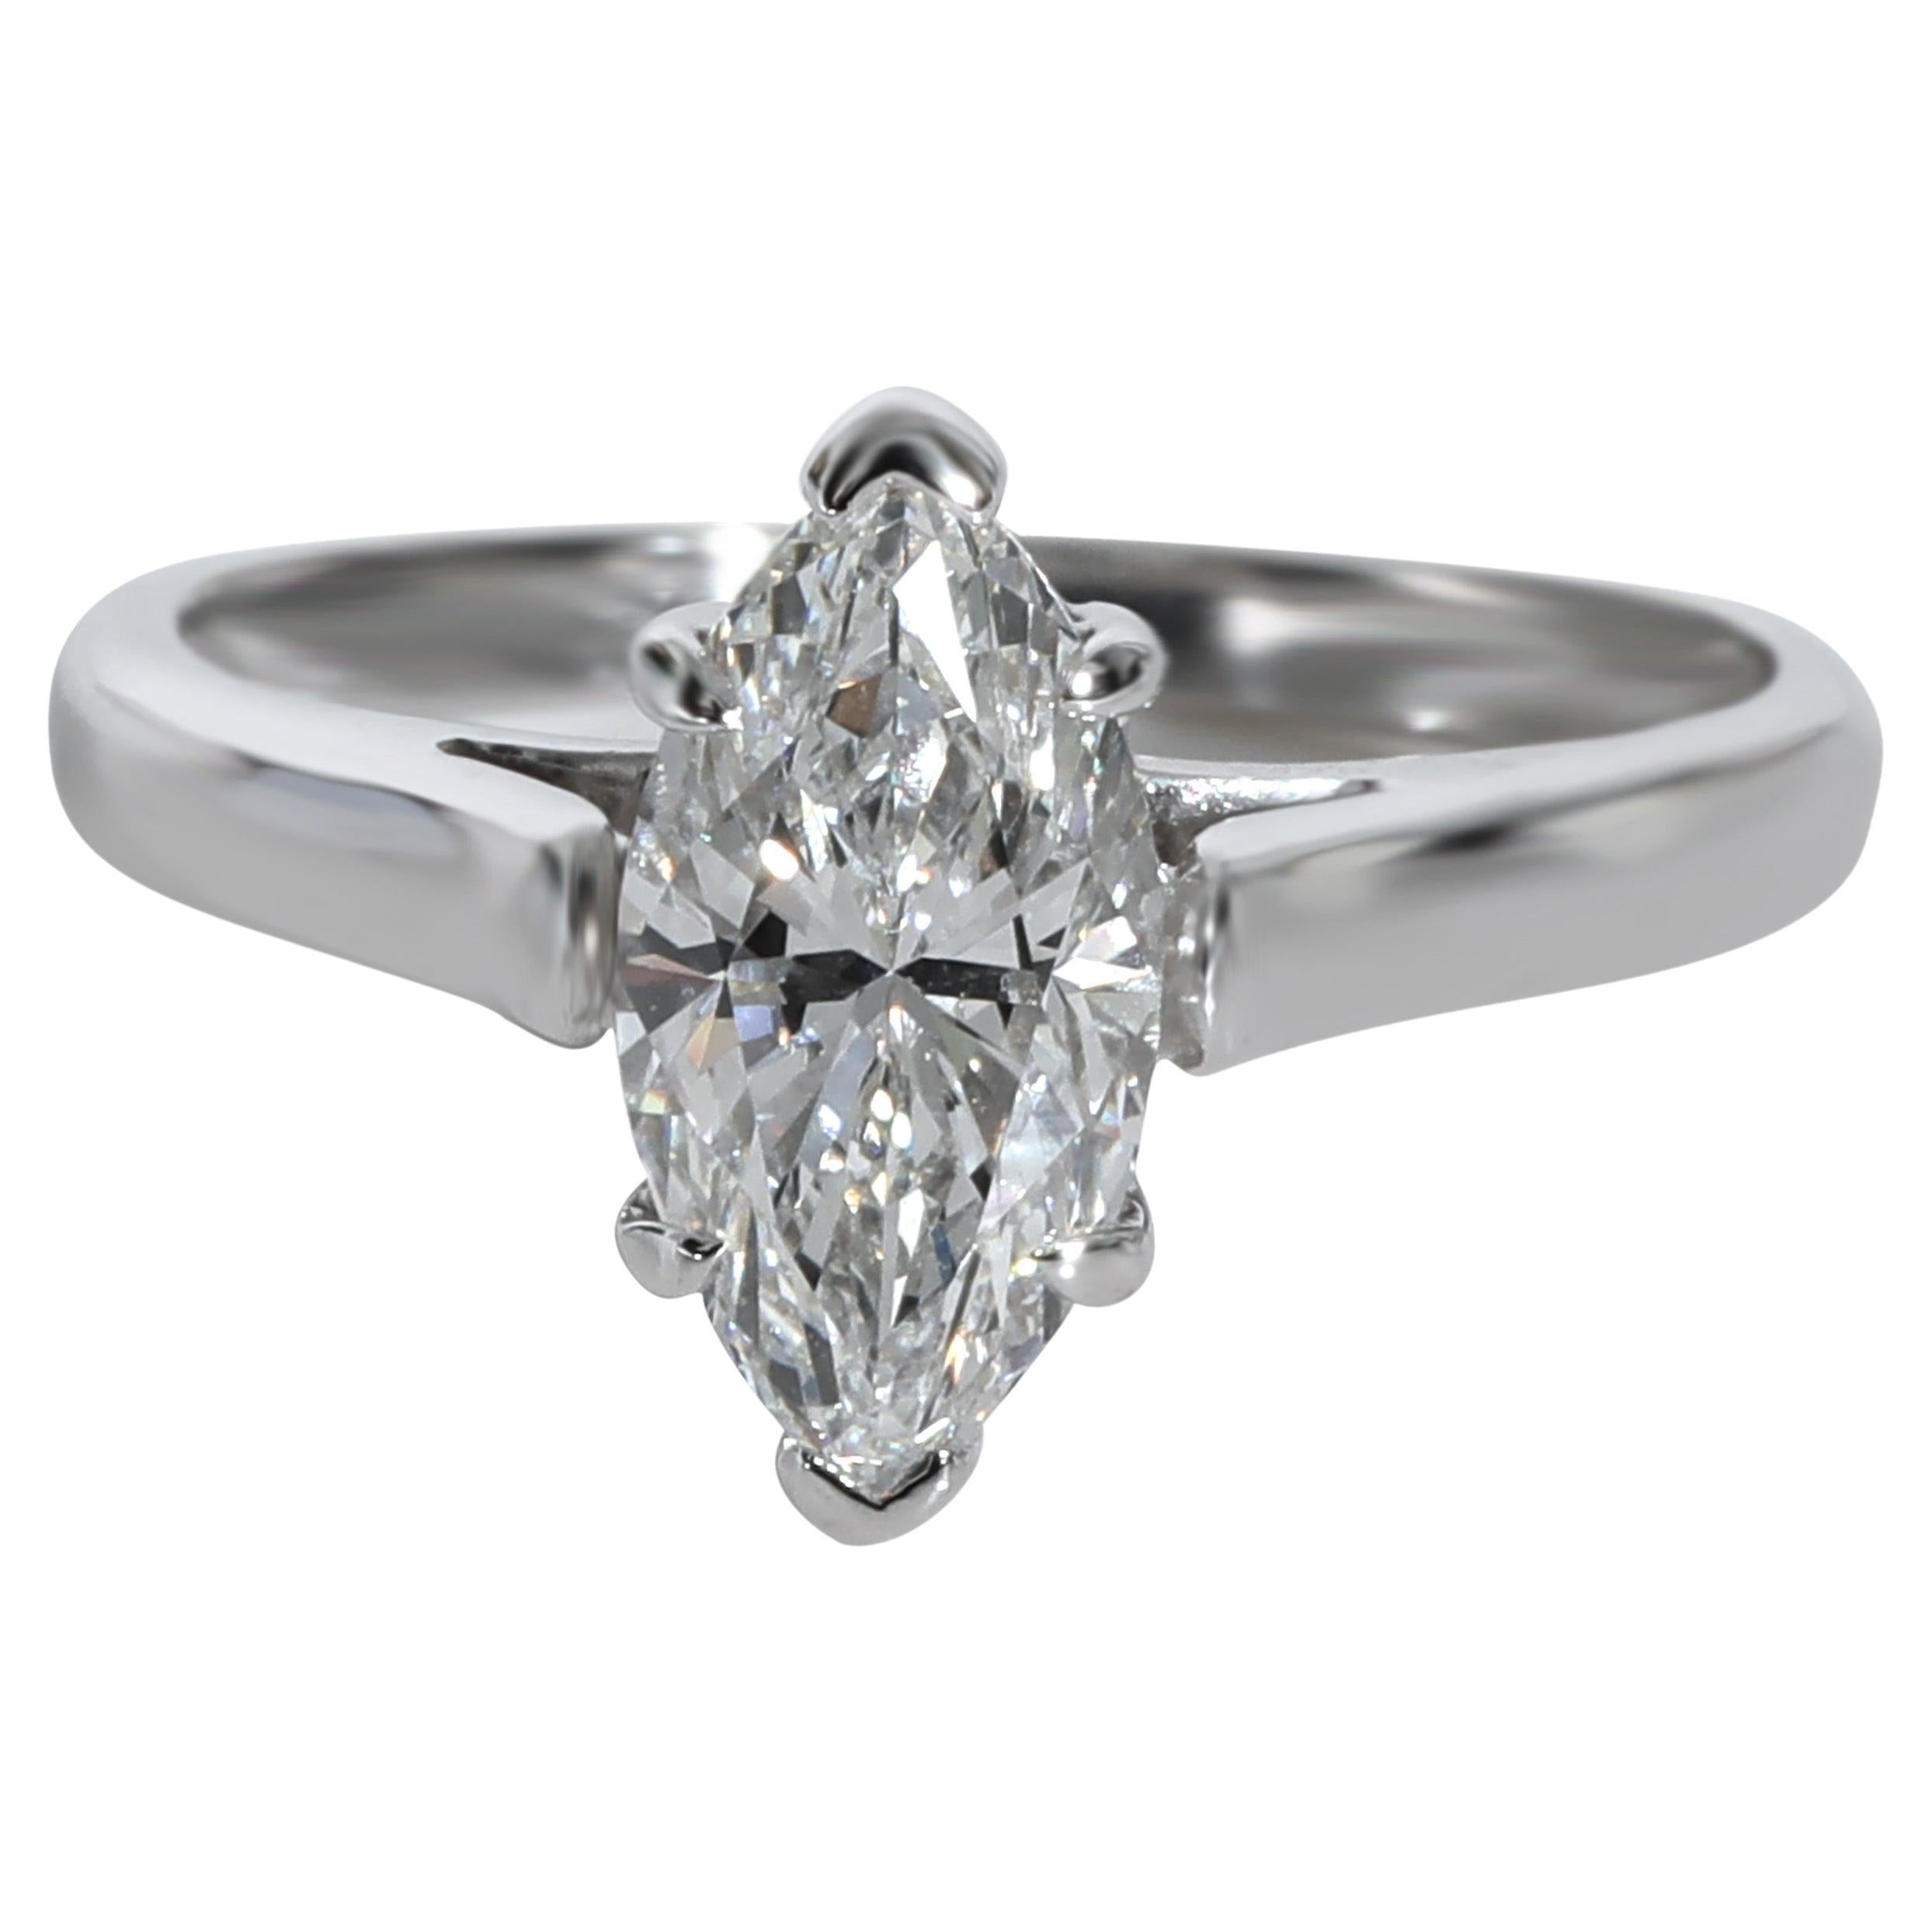 Tiffany & Co. Marquise Solitaire Diamond Ring in Platinum E VVS2 1.22 CTW For Sale